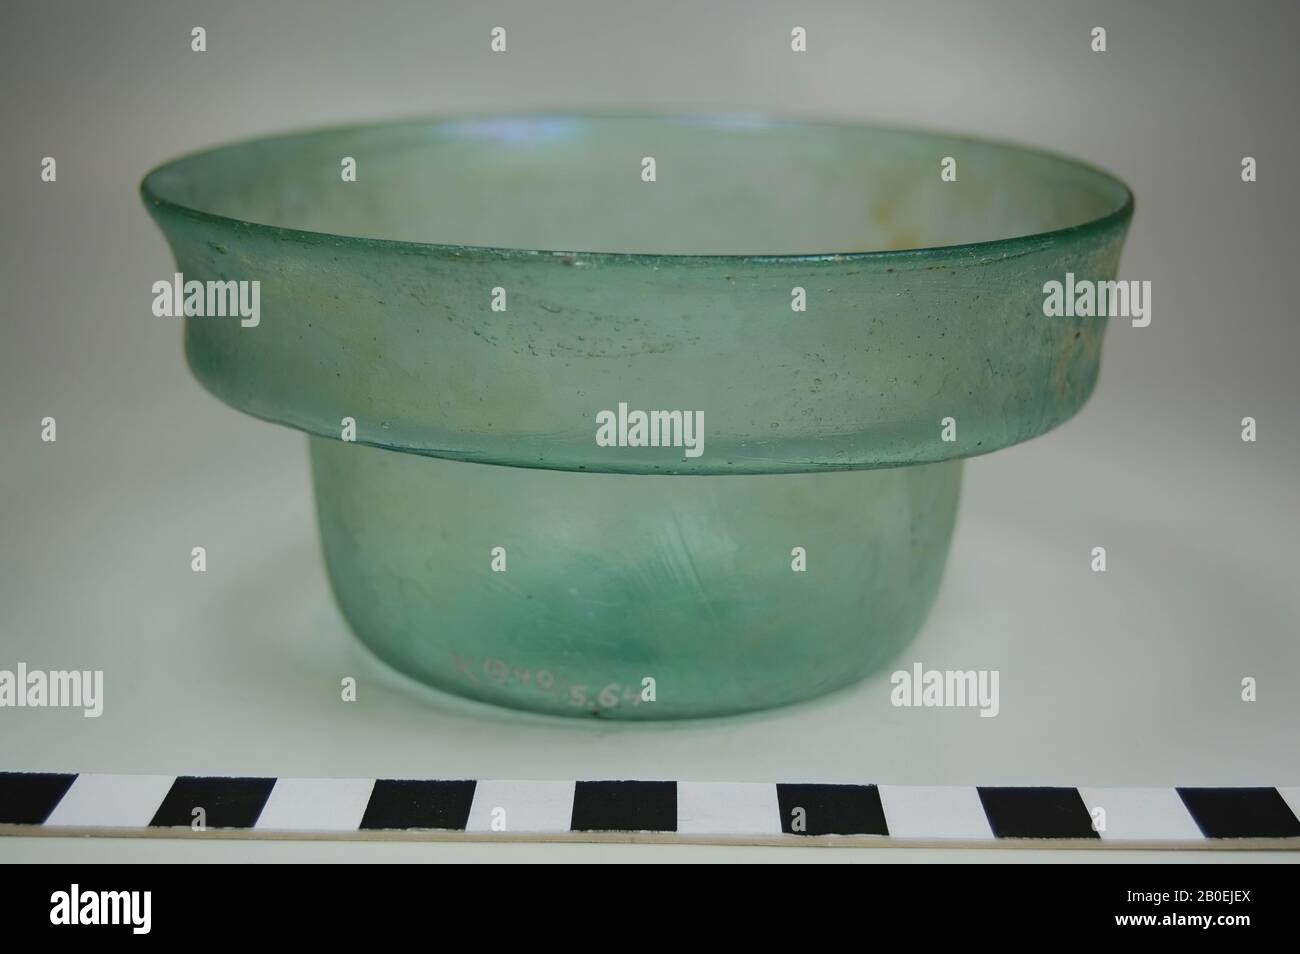 Bowl of greenish glass with outwardly protruding upright edge, plate, glass, 5.6 cm Stock Photo